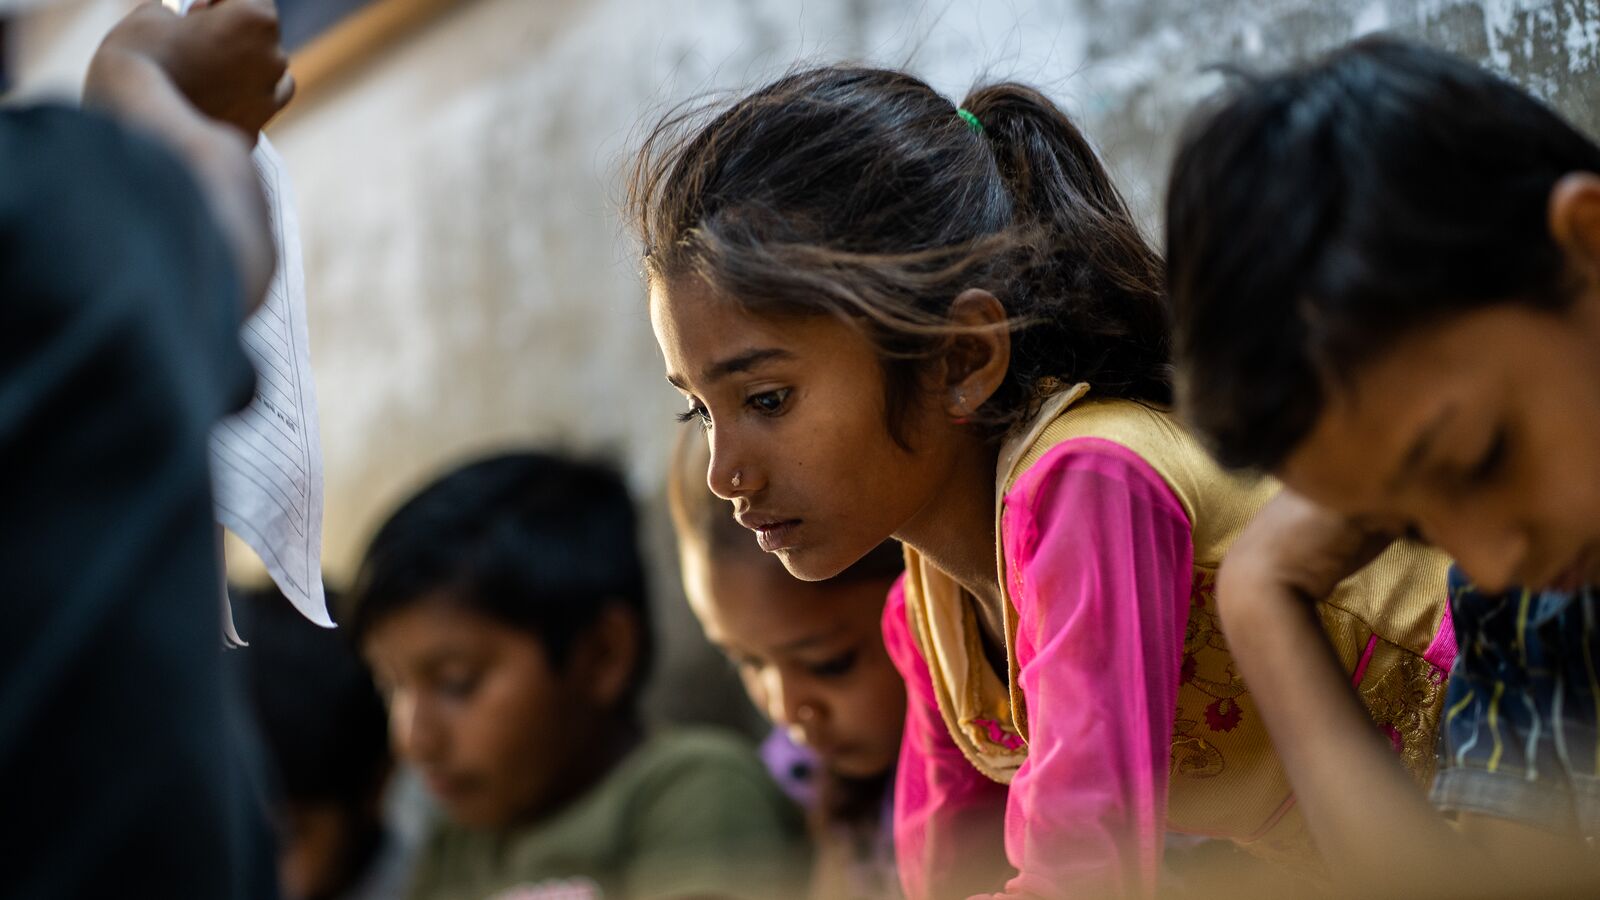 A student studying in a classroom supported through development impact bond funding